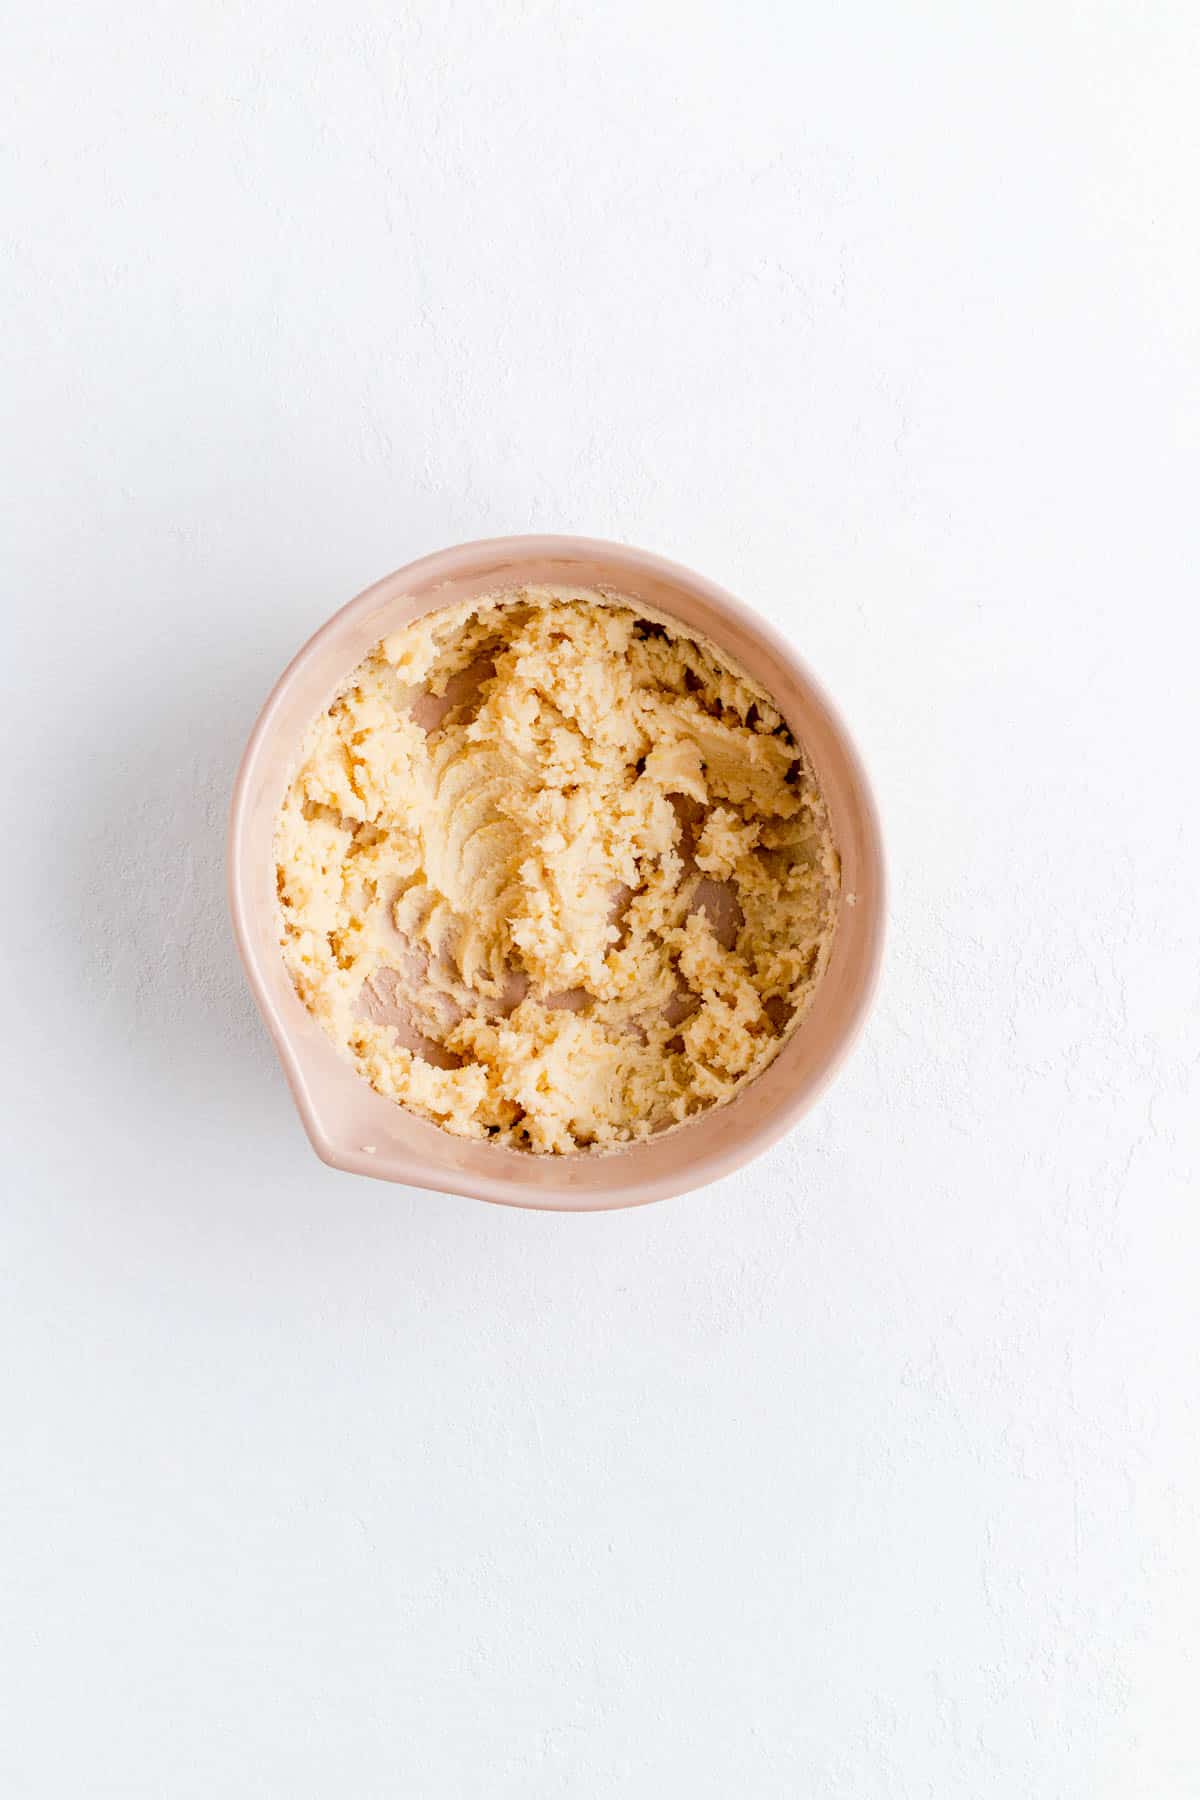 Butter and sugar creamed for cupcakes and a tan bowl on white background.